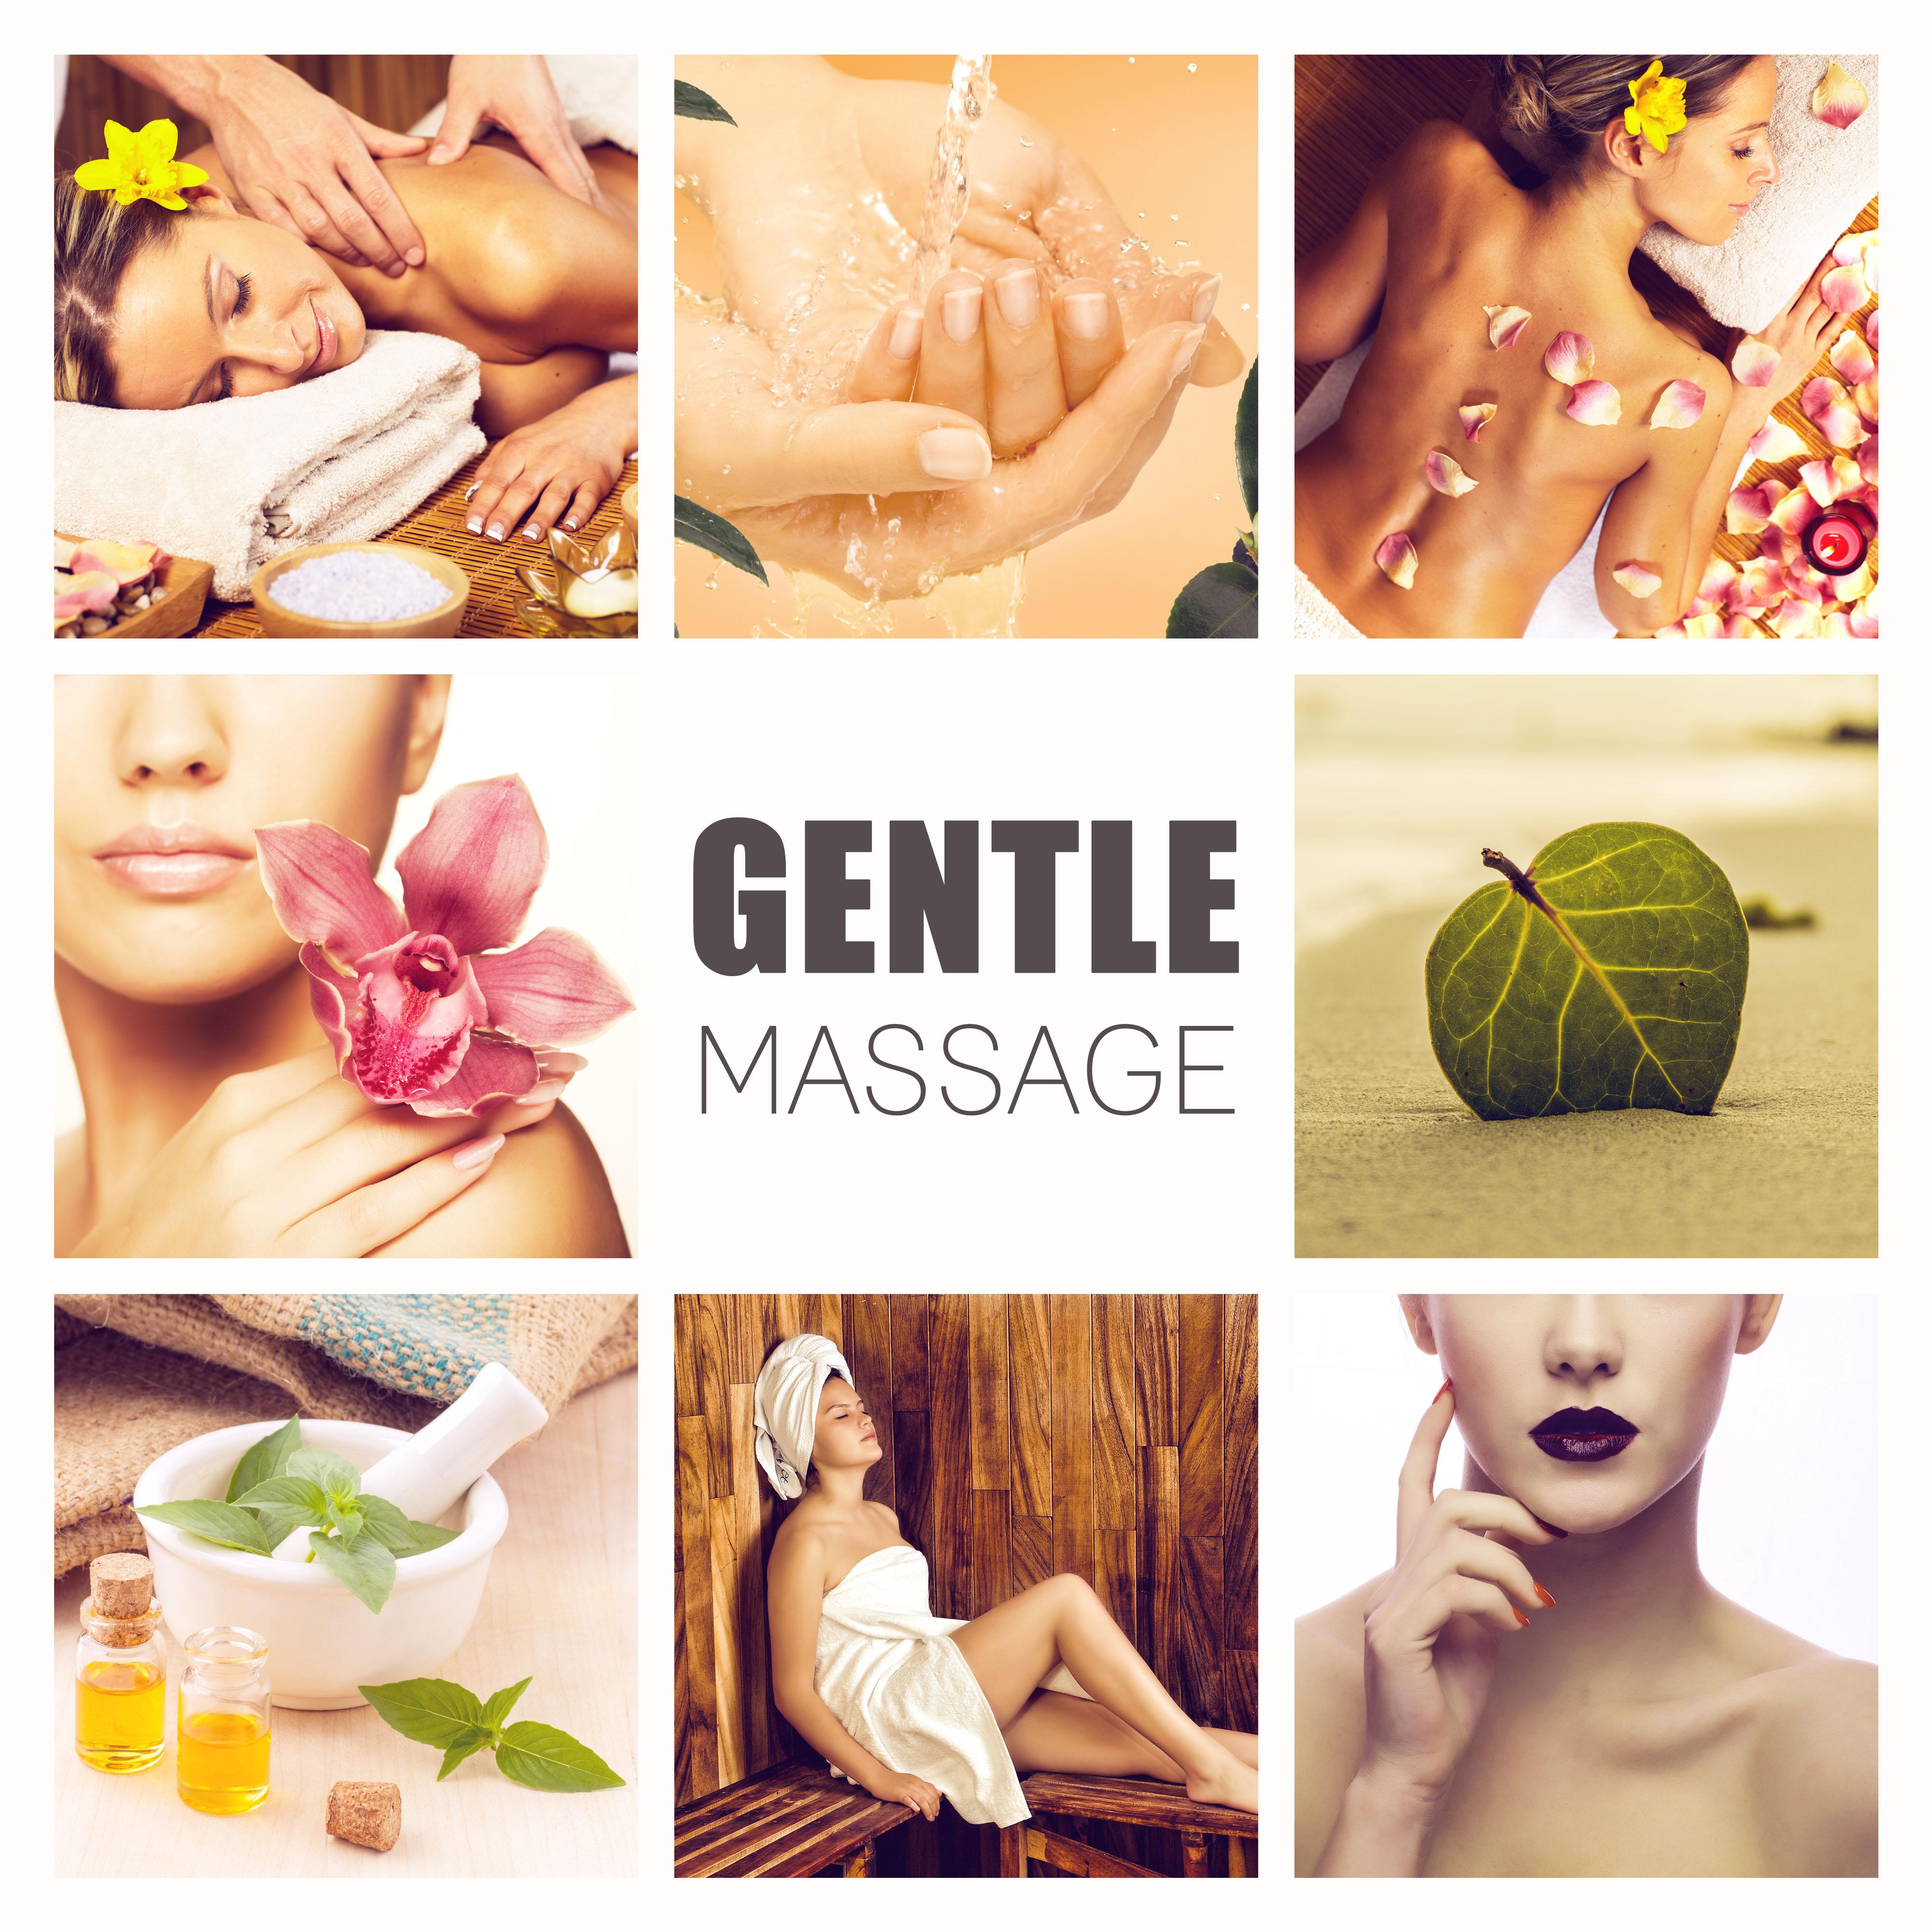 Gentle Massage  Spa Music, Massage Music, Therapy Sounds, Nature Sounds, Healing Music, Easy Listening